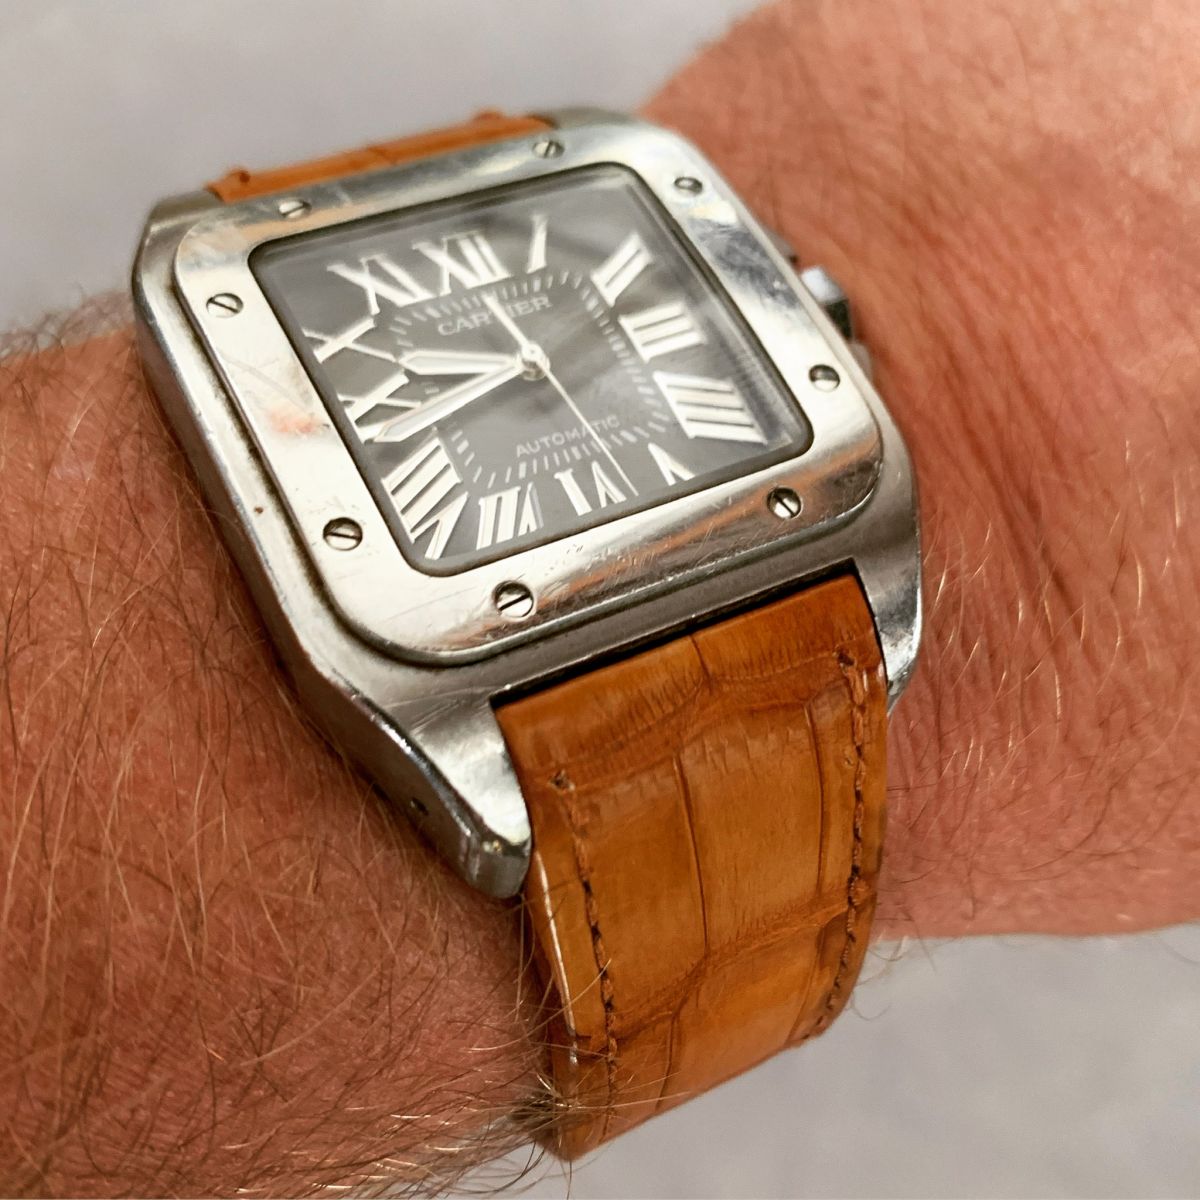 Cartier Santos 100 XL style strap in Amber Brown Alligator leather. Integrated